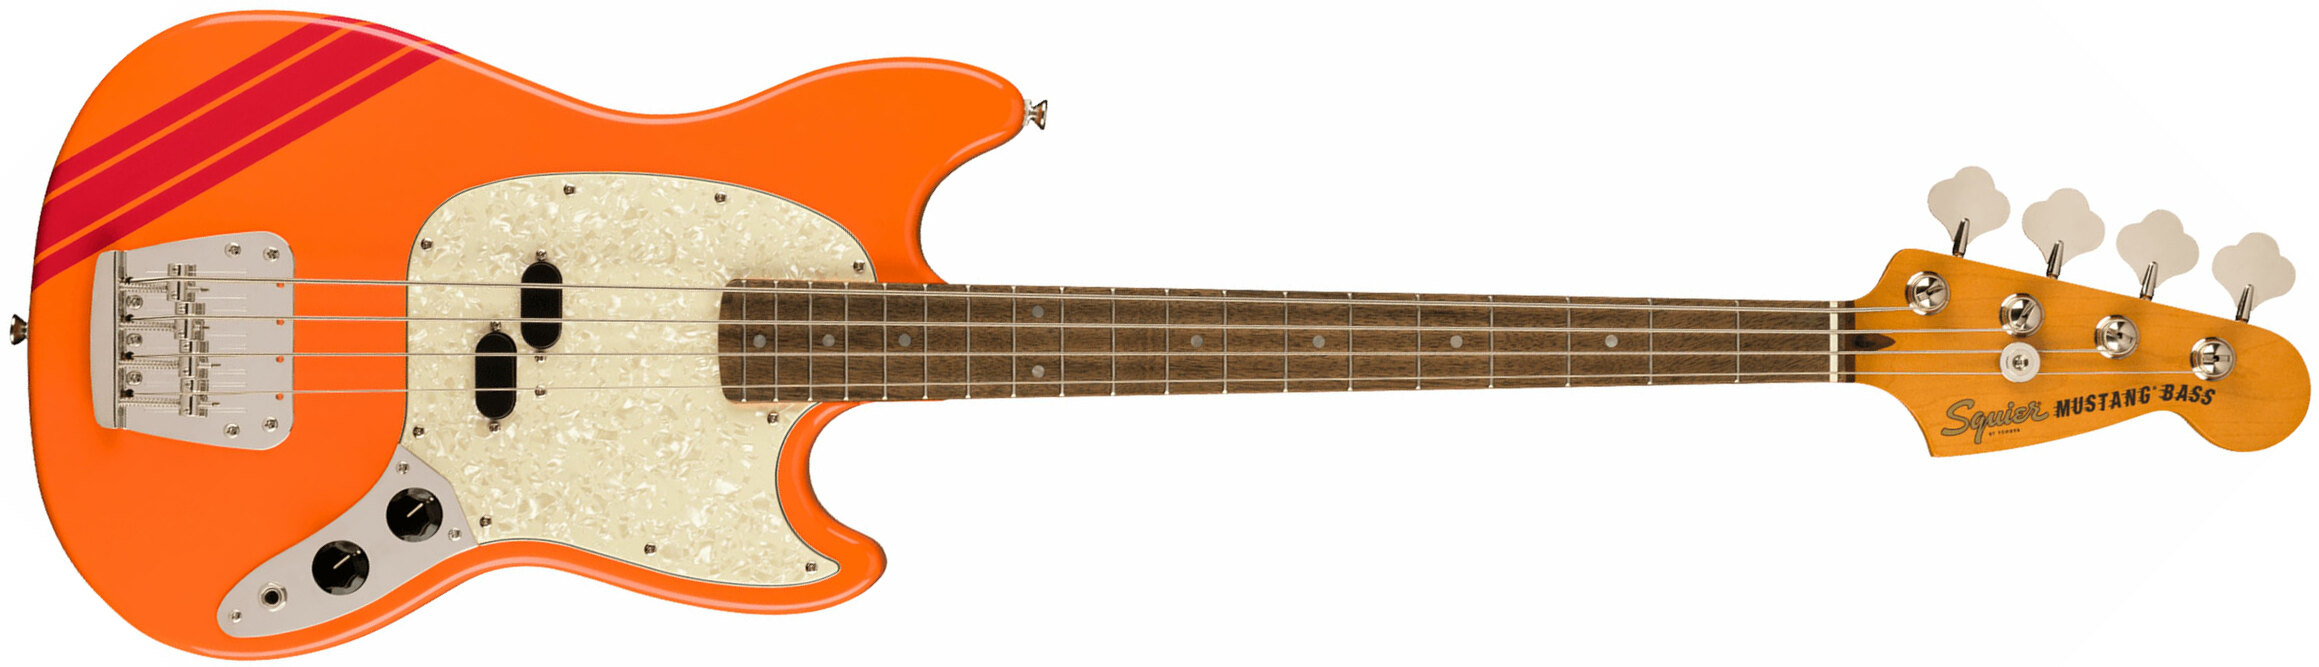 Squier Mustang Bass '60s Classic Vibe Competition Fsr Ltd Lau - Capri Orange - Solid body electric bass - Main picture